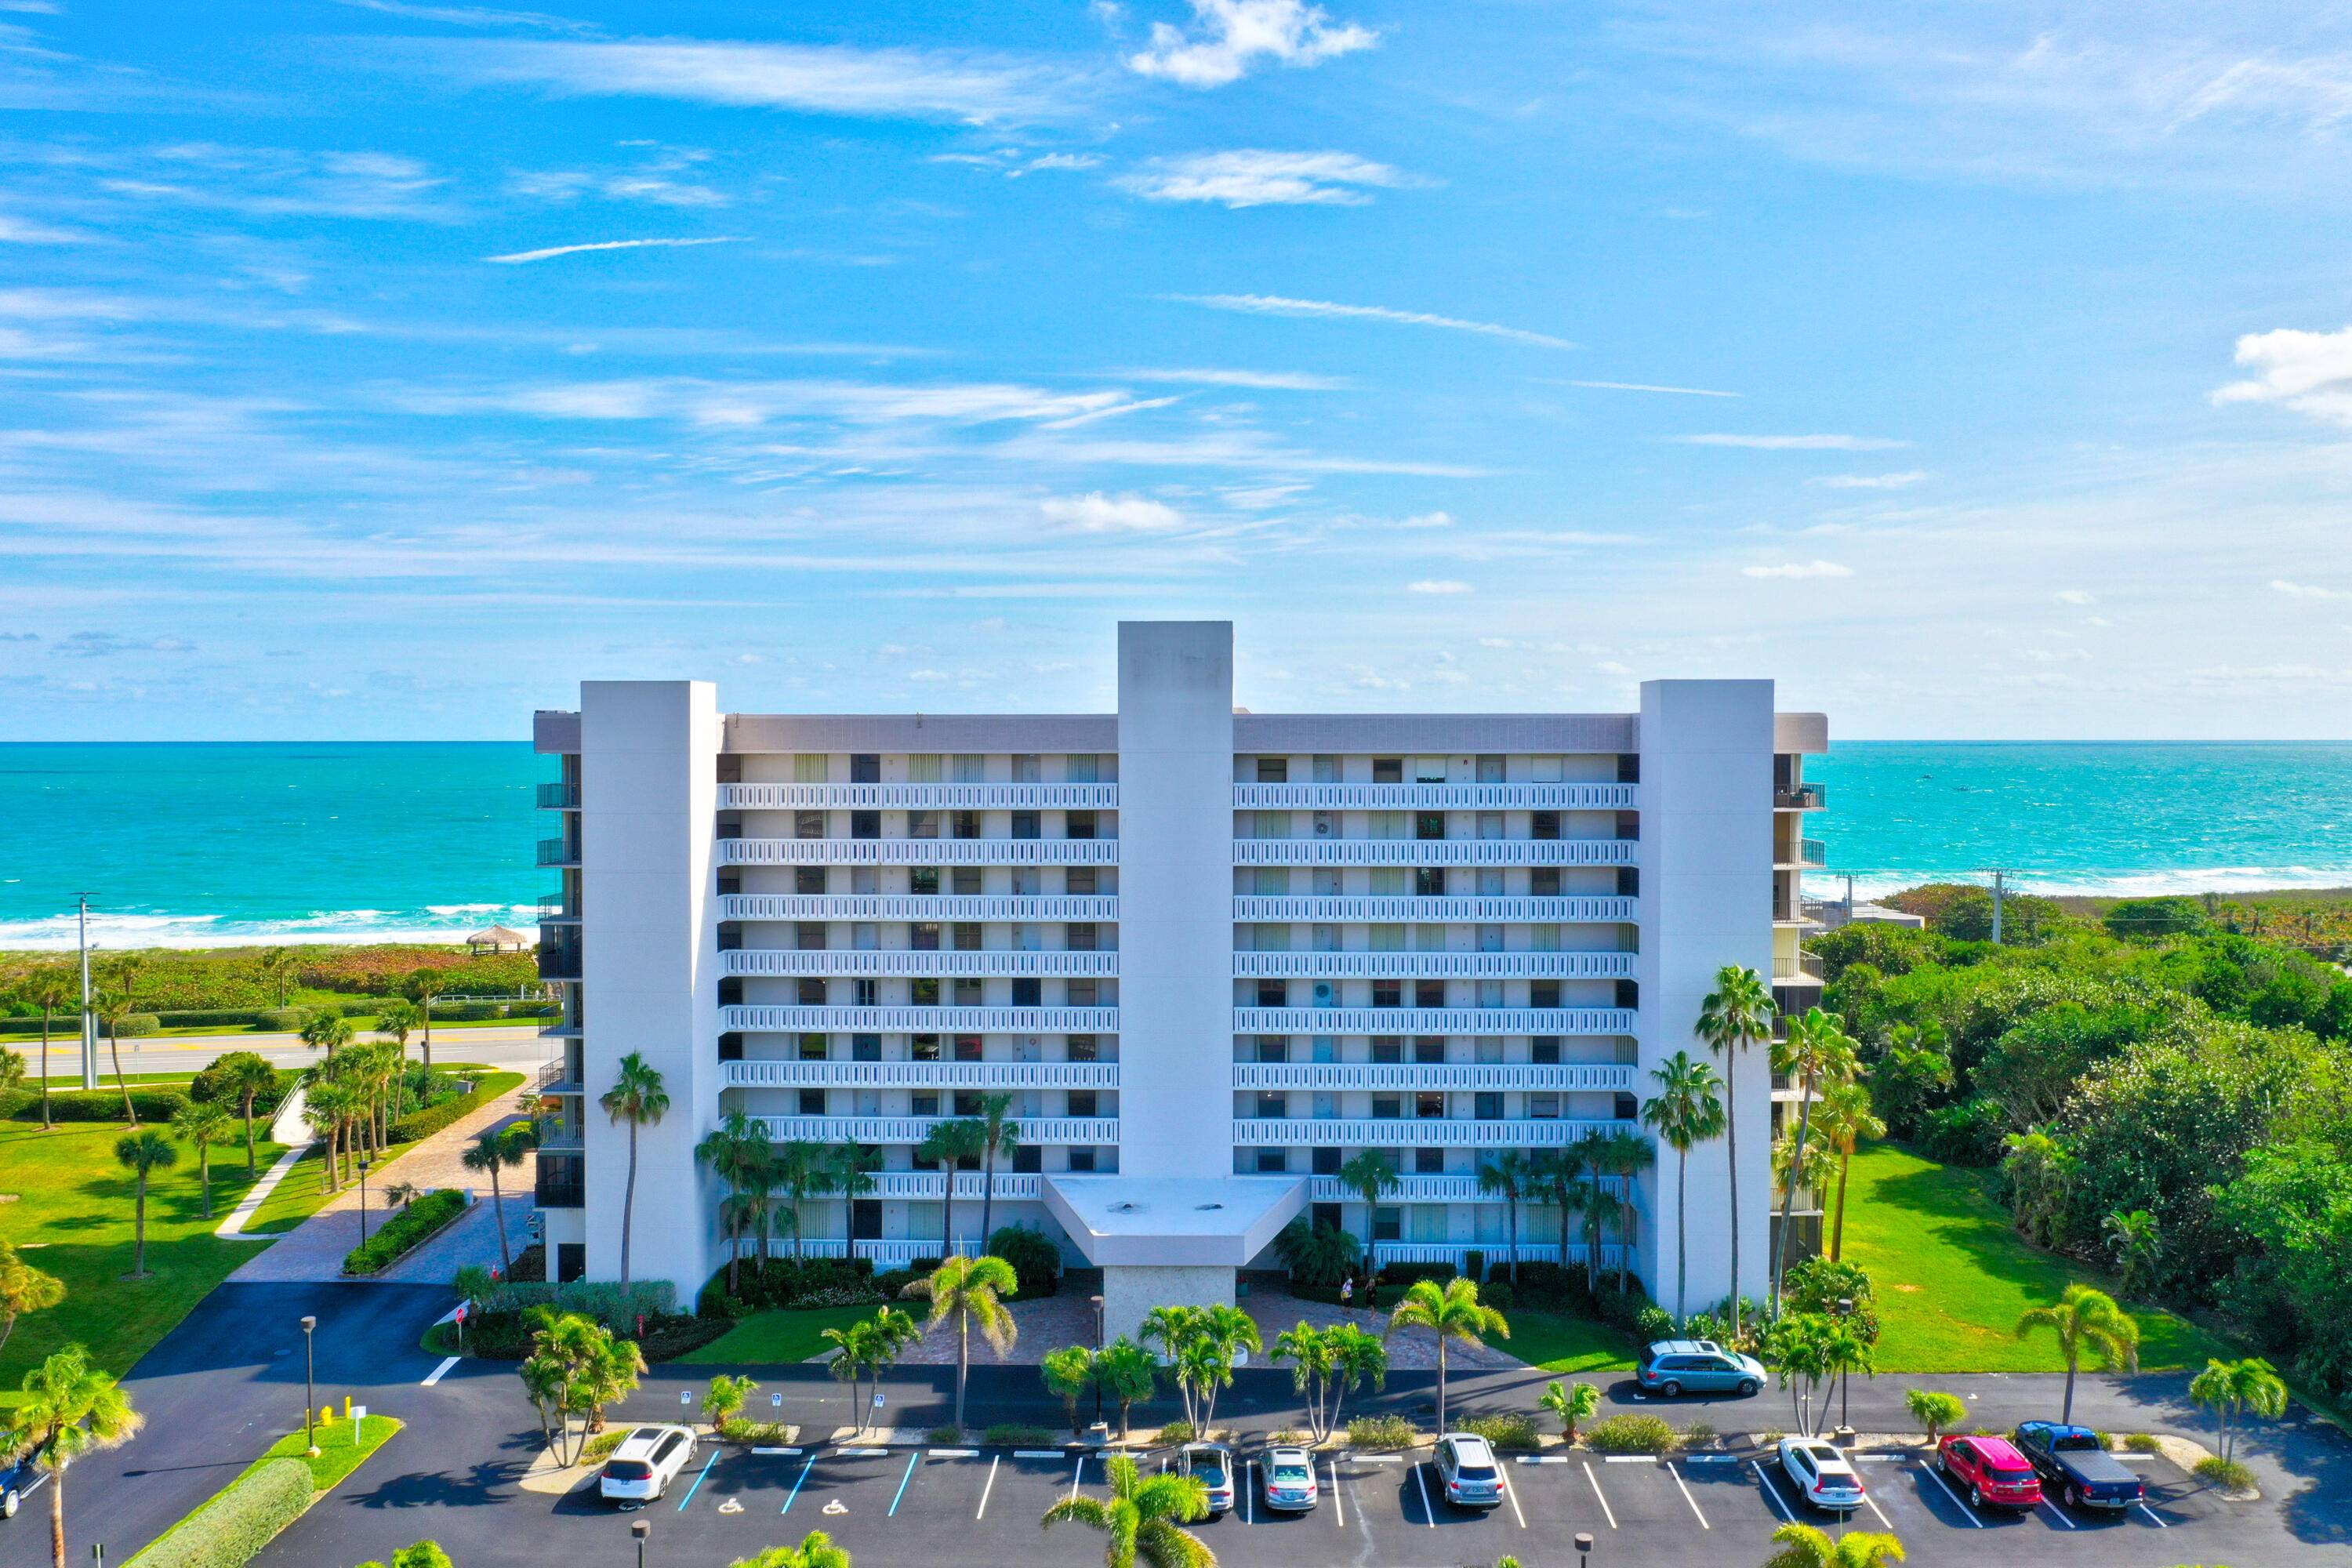 Pamper yourself with the epitome of luxurious island living in this exquisite two bedroom, two bathroom condominium that offers breathtaking views of the majestic ocean.